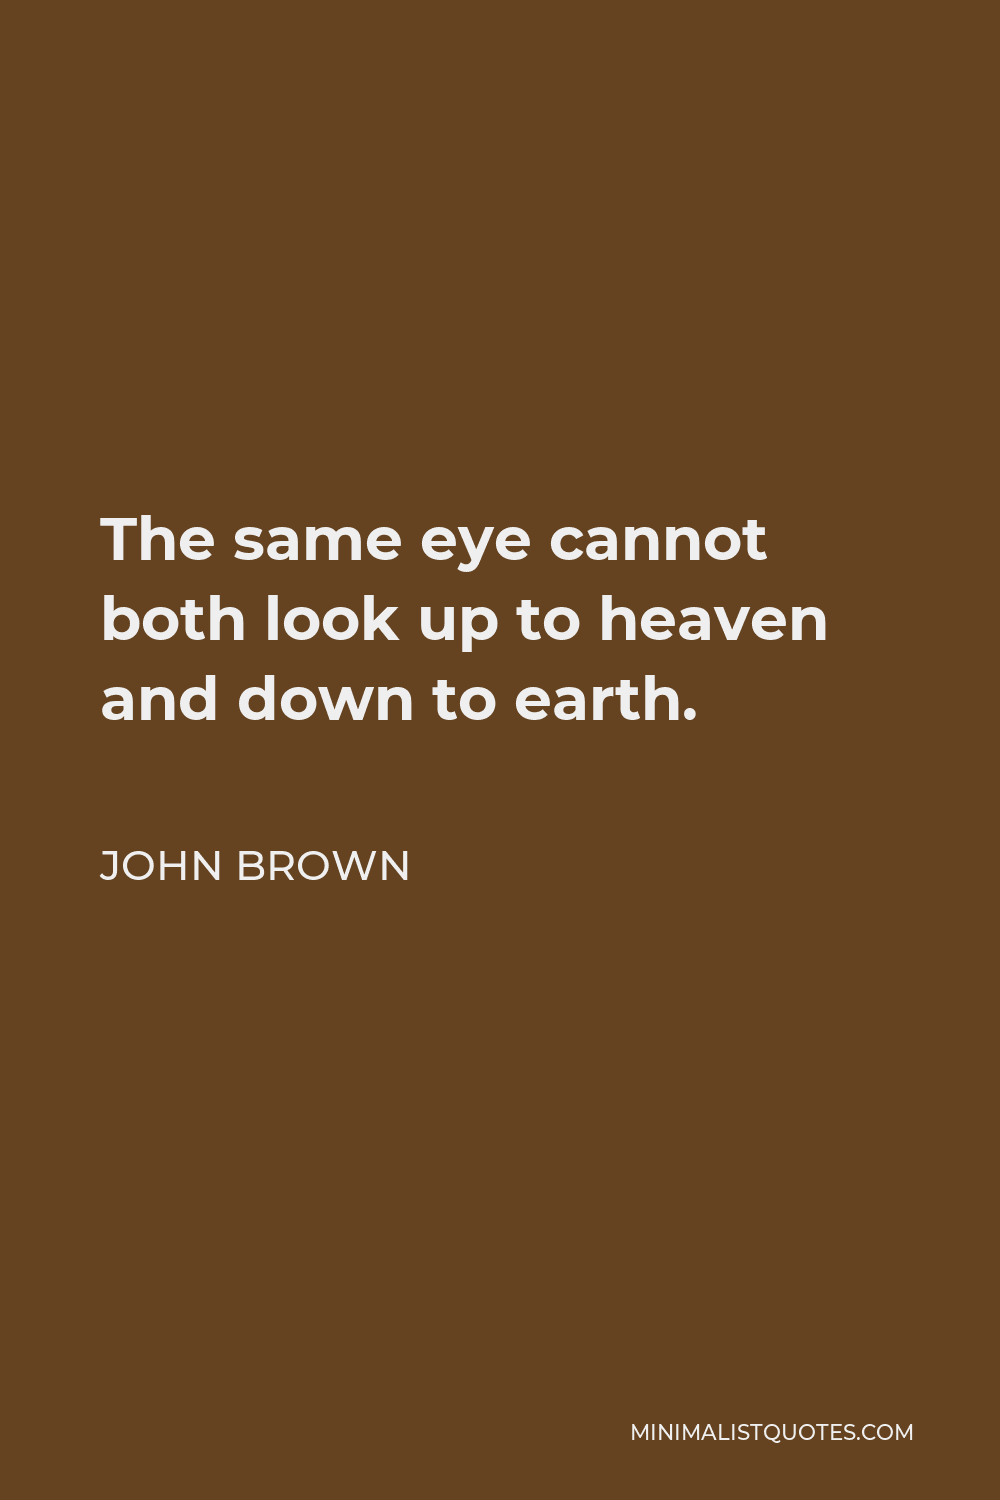 John Brown Quote - The same eye cannot both look up to heaven and down to earth.